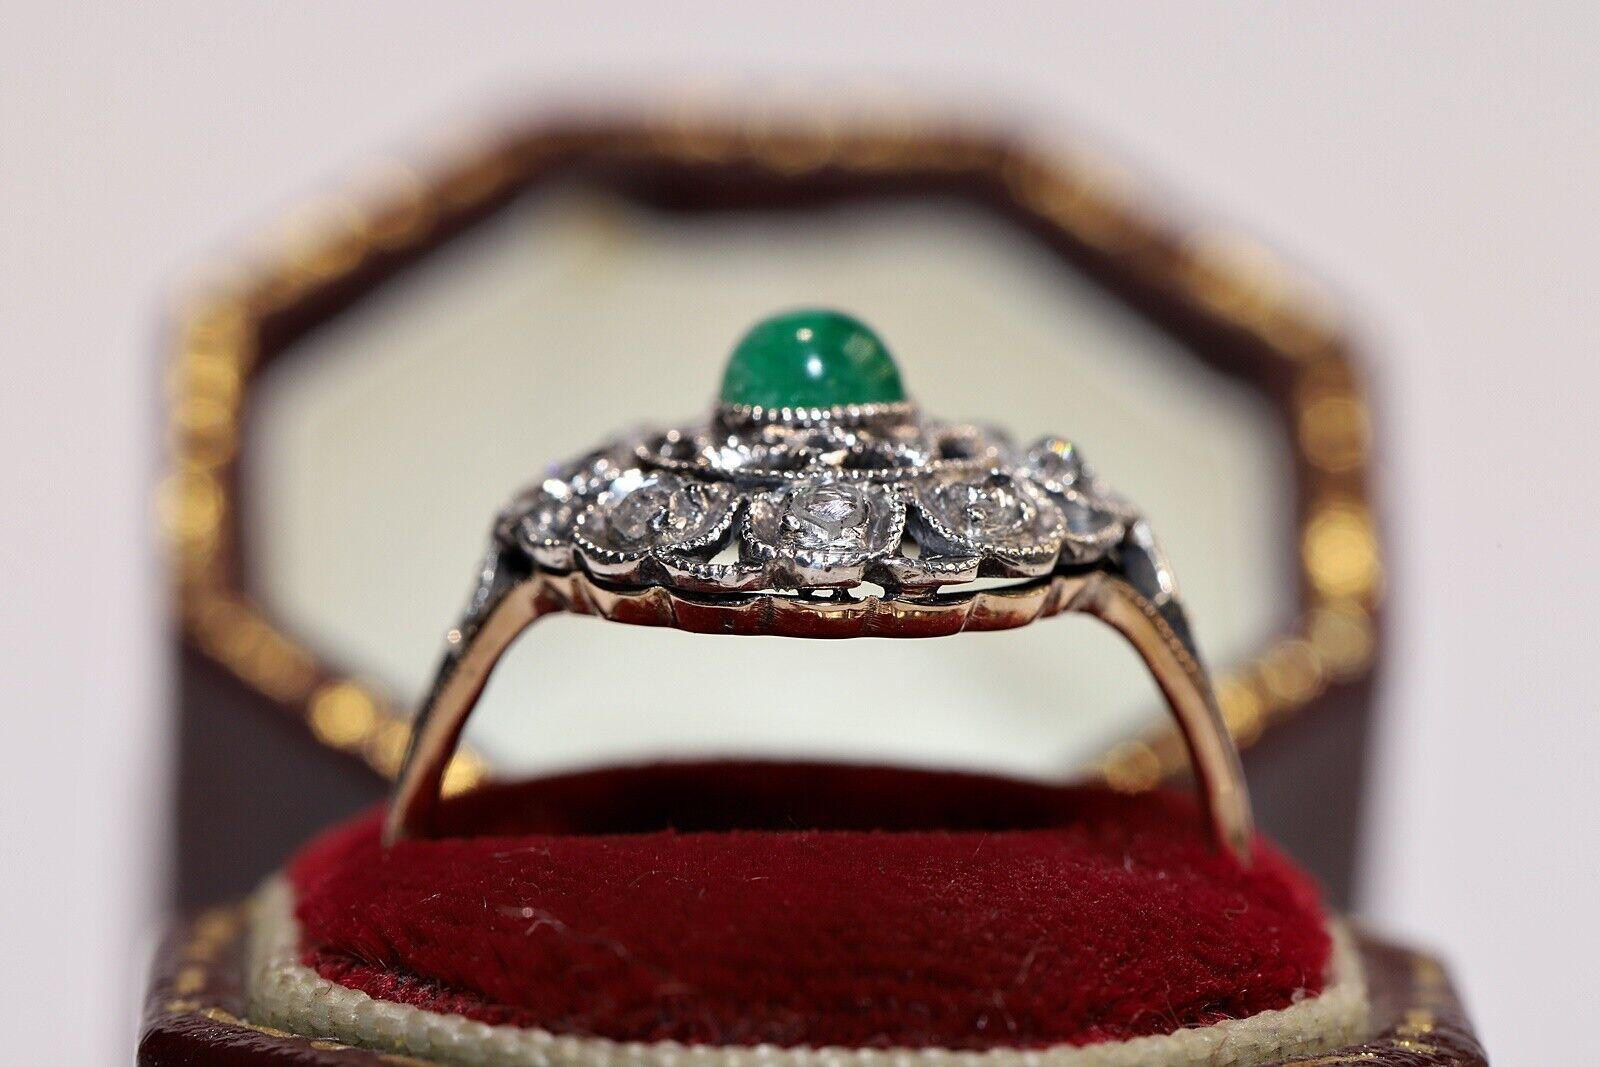 In very good condition.
Total weight is 2.4 grams.
Totally is diamond 0.35 carat.
The diamond is has H-I color and vs-s1clarity.
Totally is emerald 0.43 carat.
Ring size is US 6.4 (We offer free resizing)
We can make any size.
Acid tested to be 14k